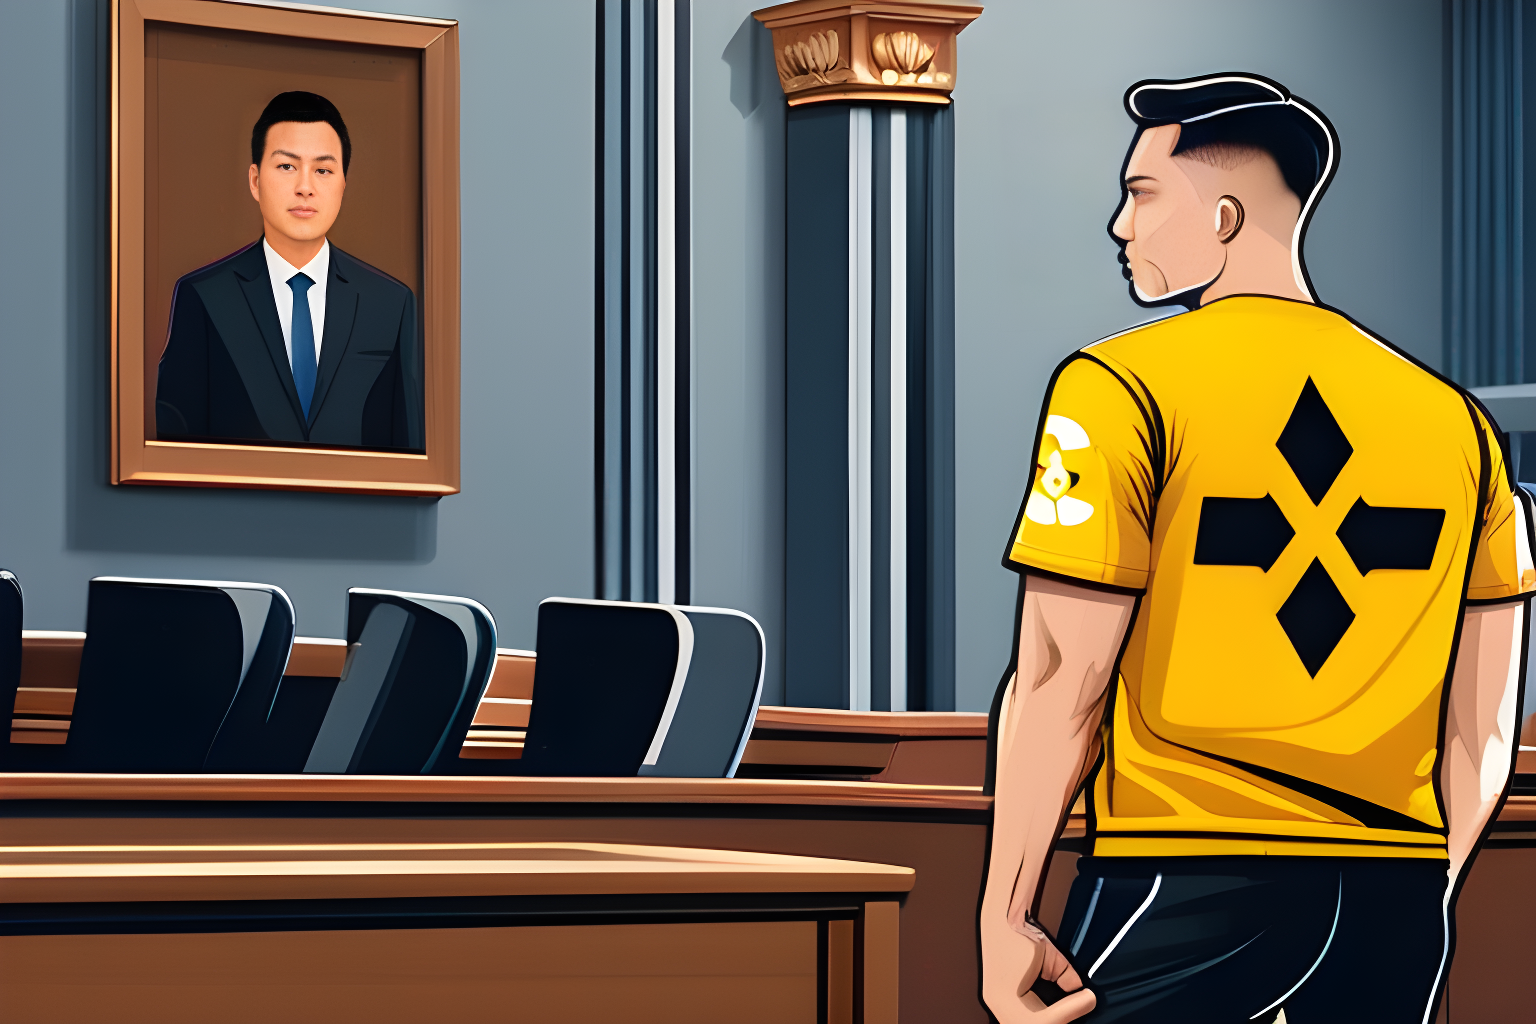 A man in a binance t-shirt in a courtroom